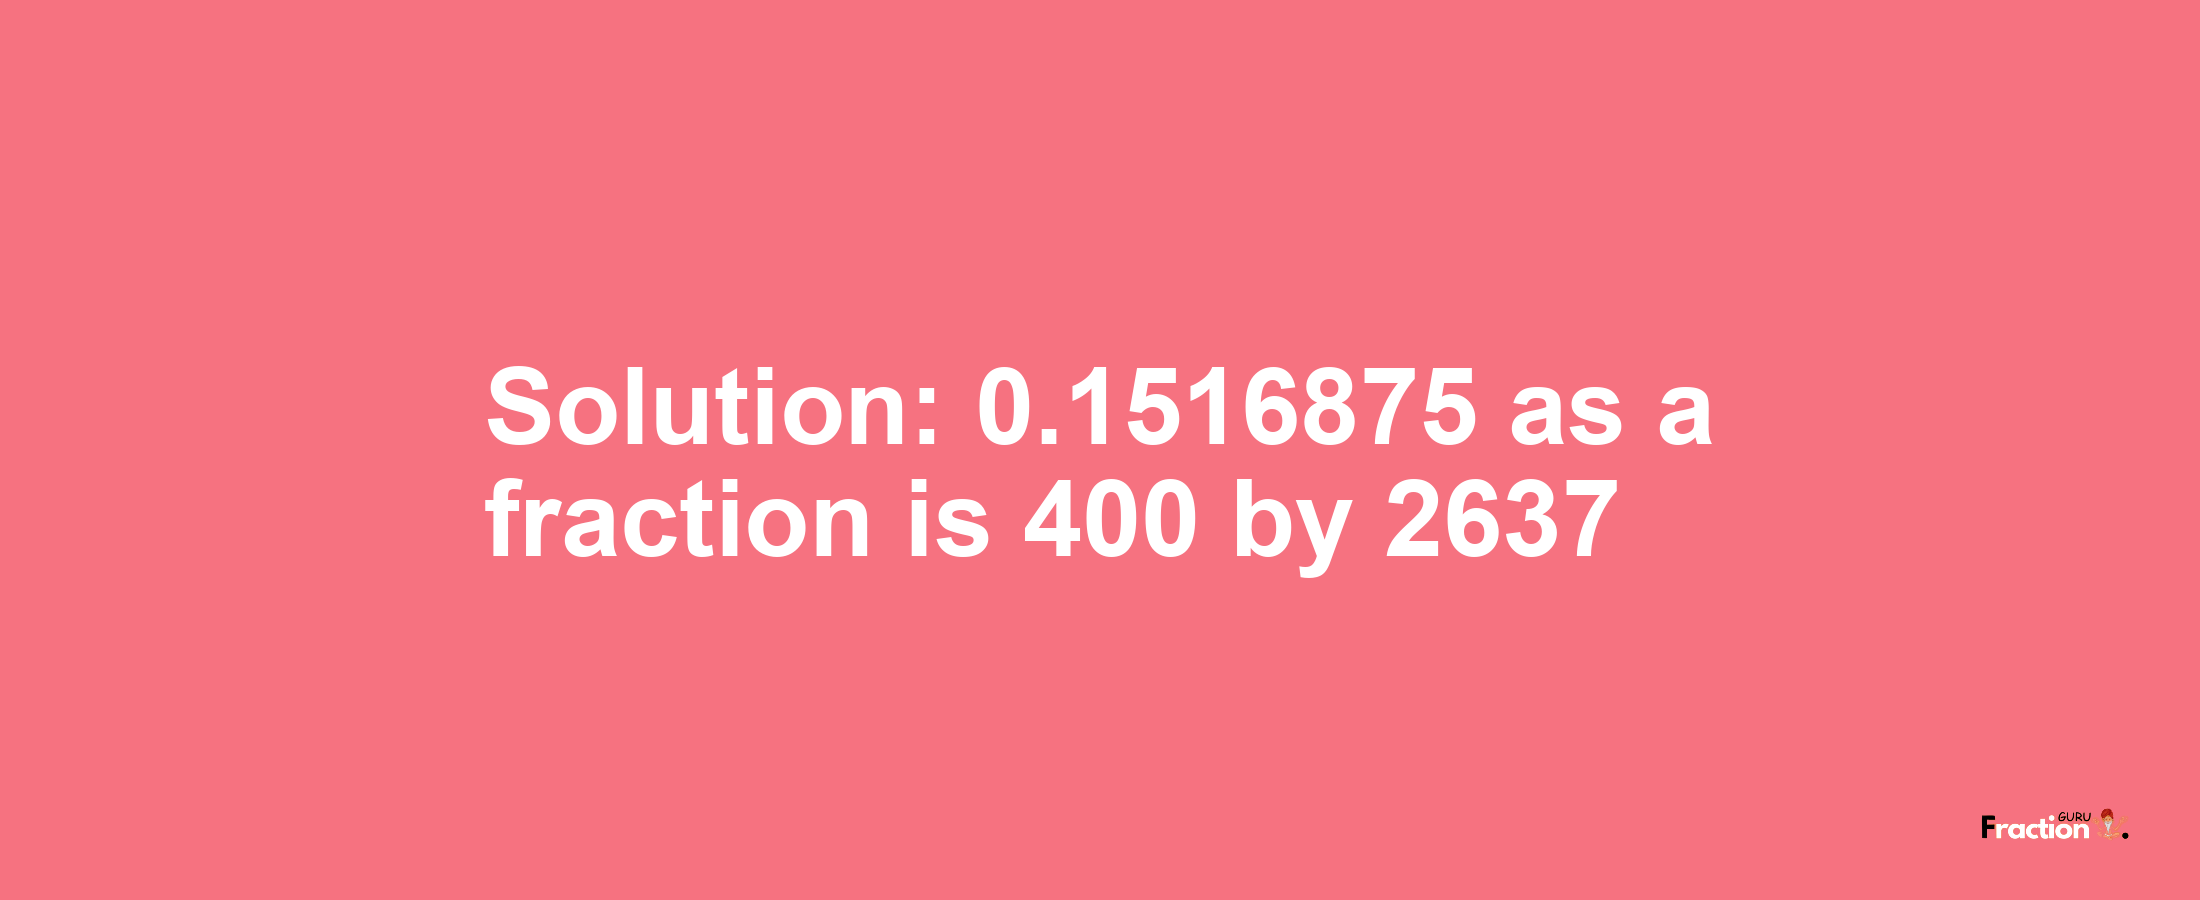 Solution:0.1516875 as a fraction is 400/2637